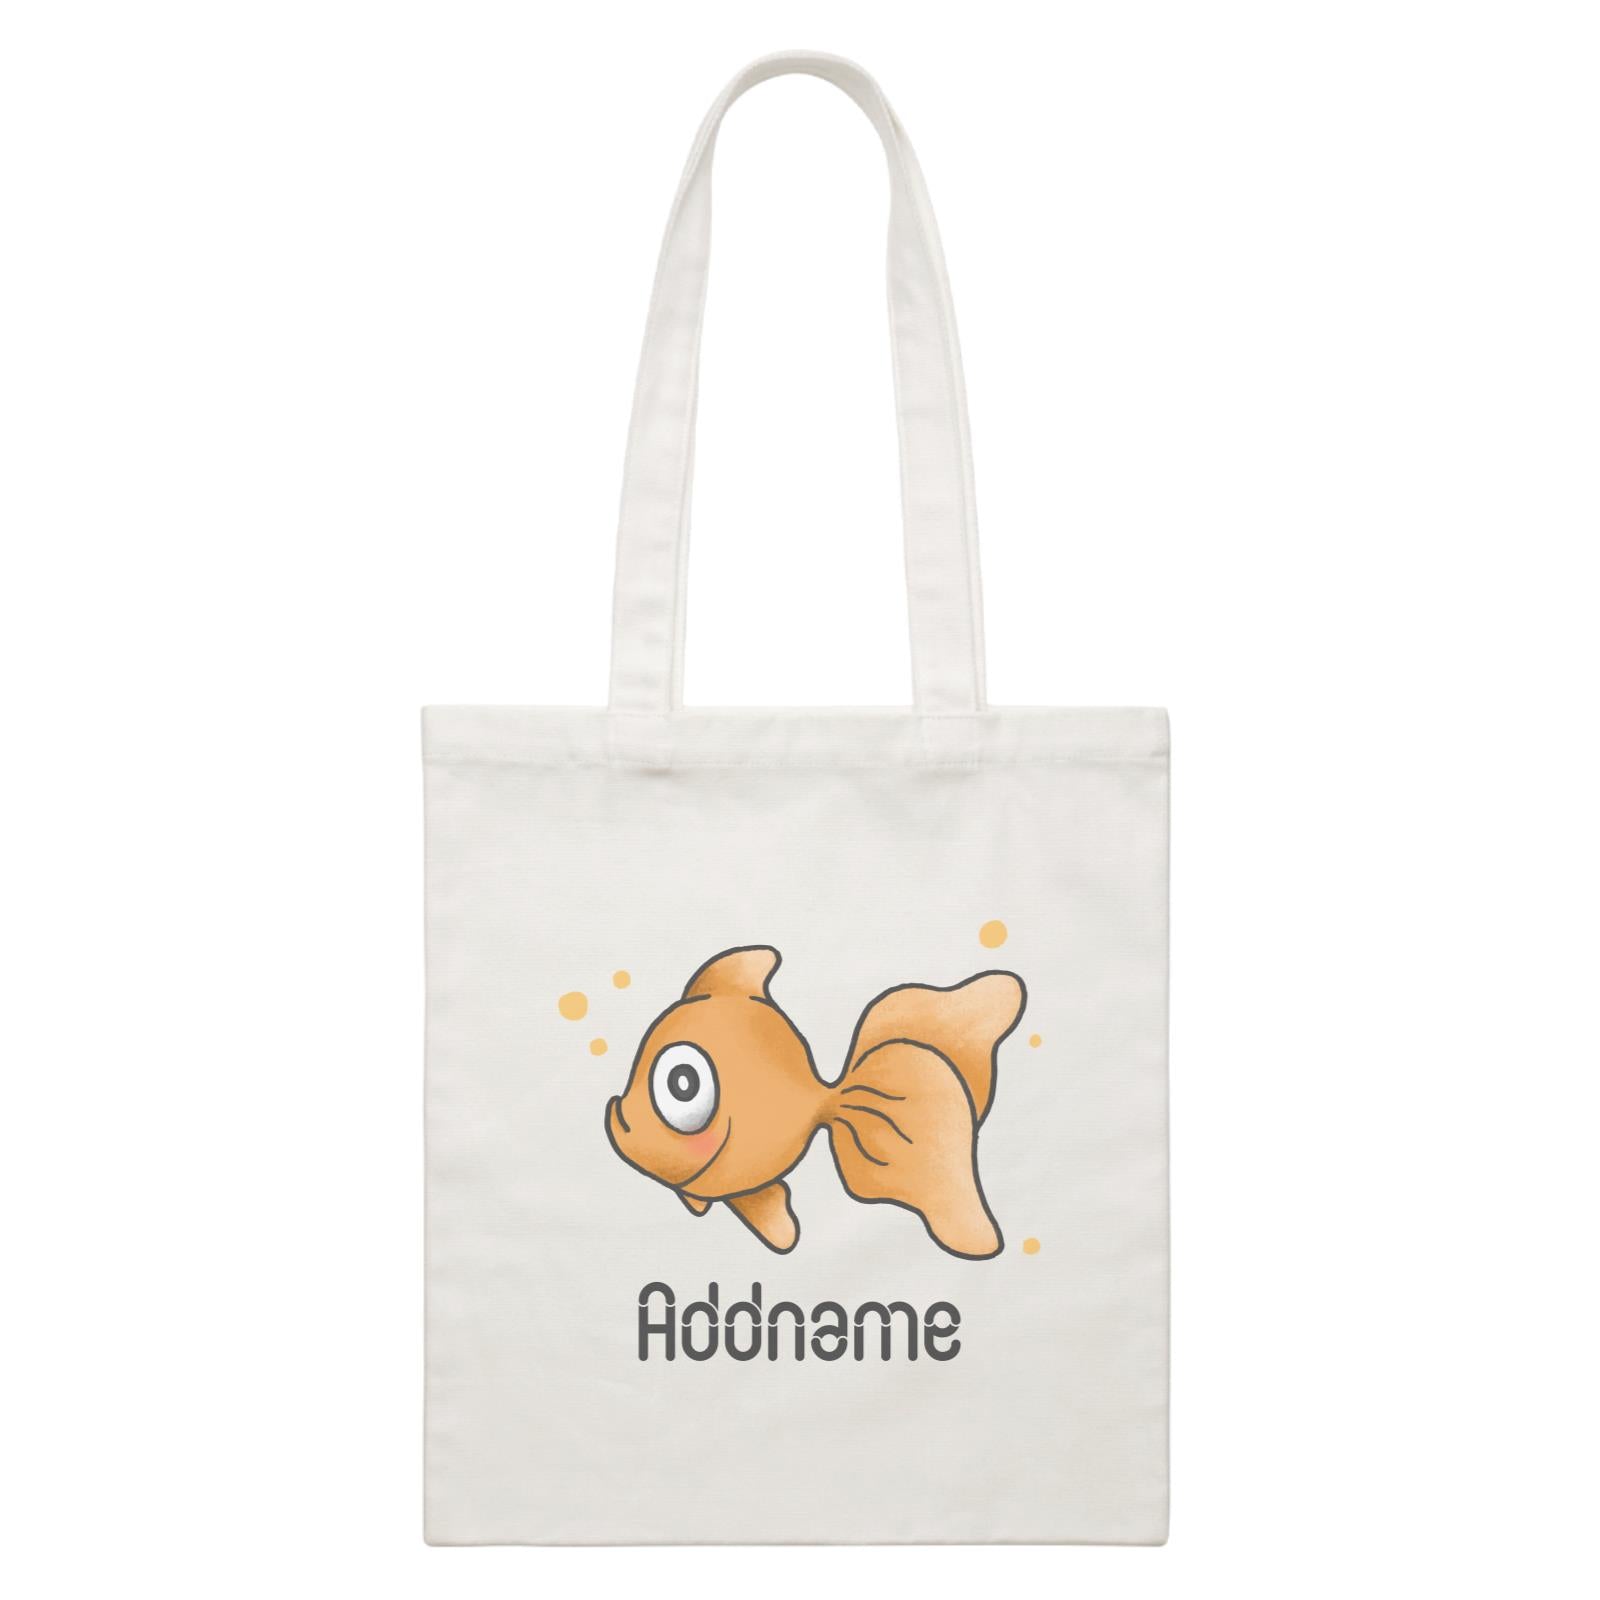 Cute Hand Drawn Style Goldfish Addname White Canvas Bag